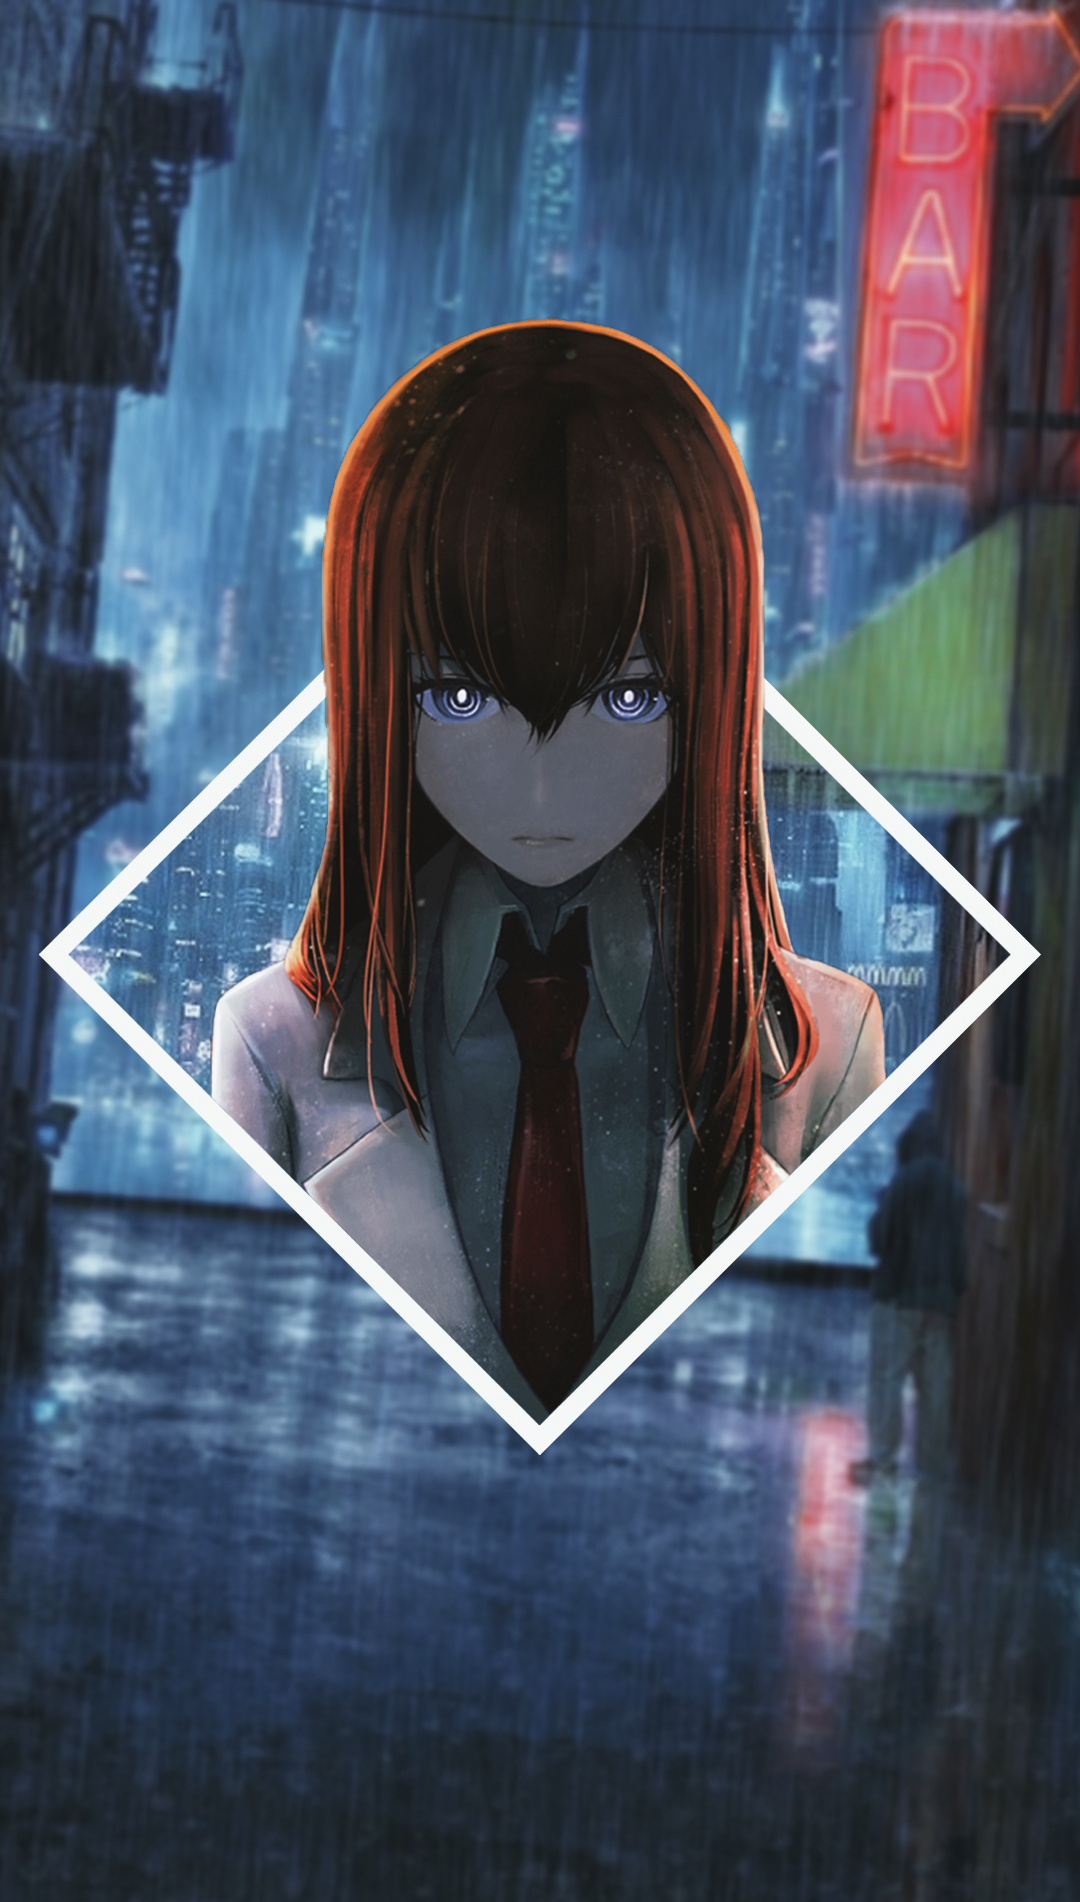 Anime 1080x1902 anime anime girls picture-in-picture Steins;Gate frontal view